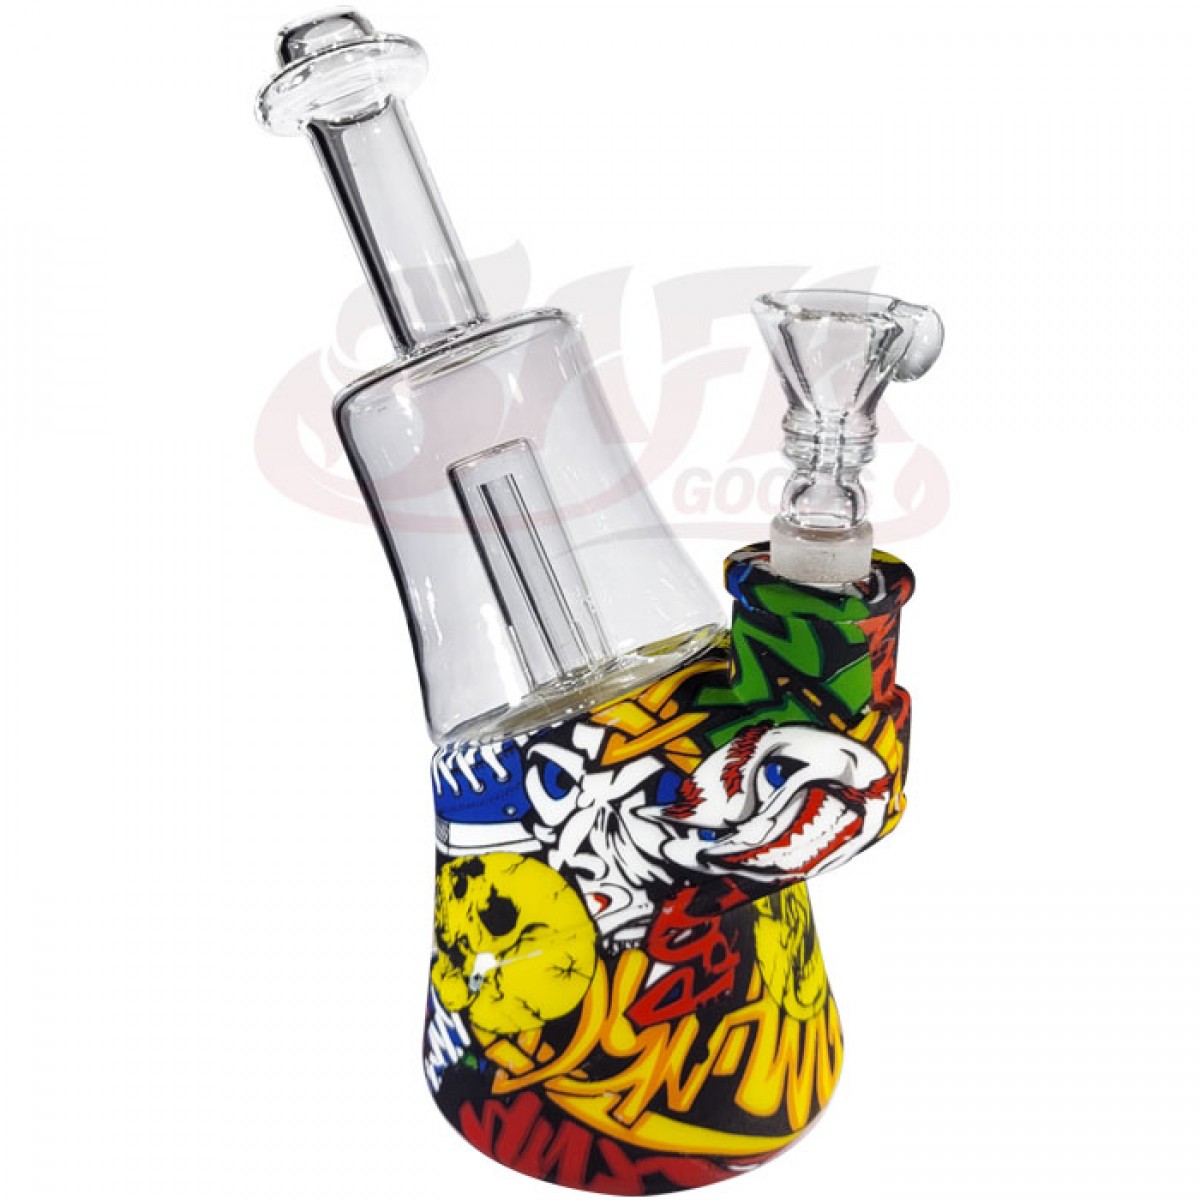 7 Inch Silicone /Glass Banger Hanger W/ Dome Perc - Various Designs 